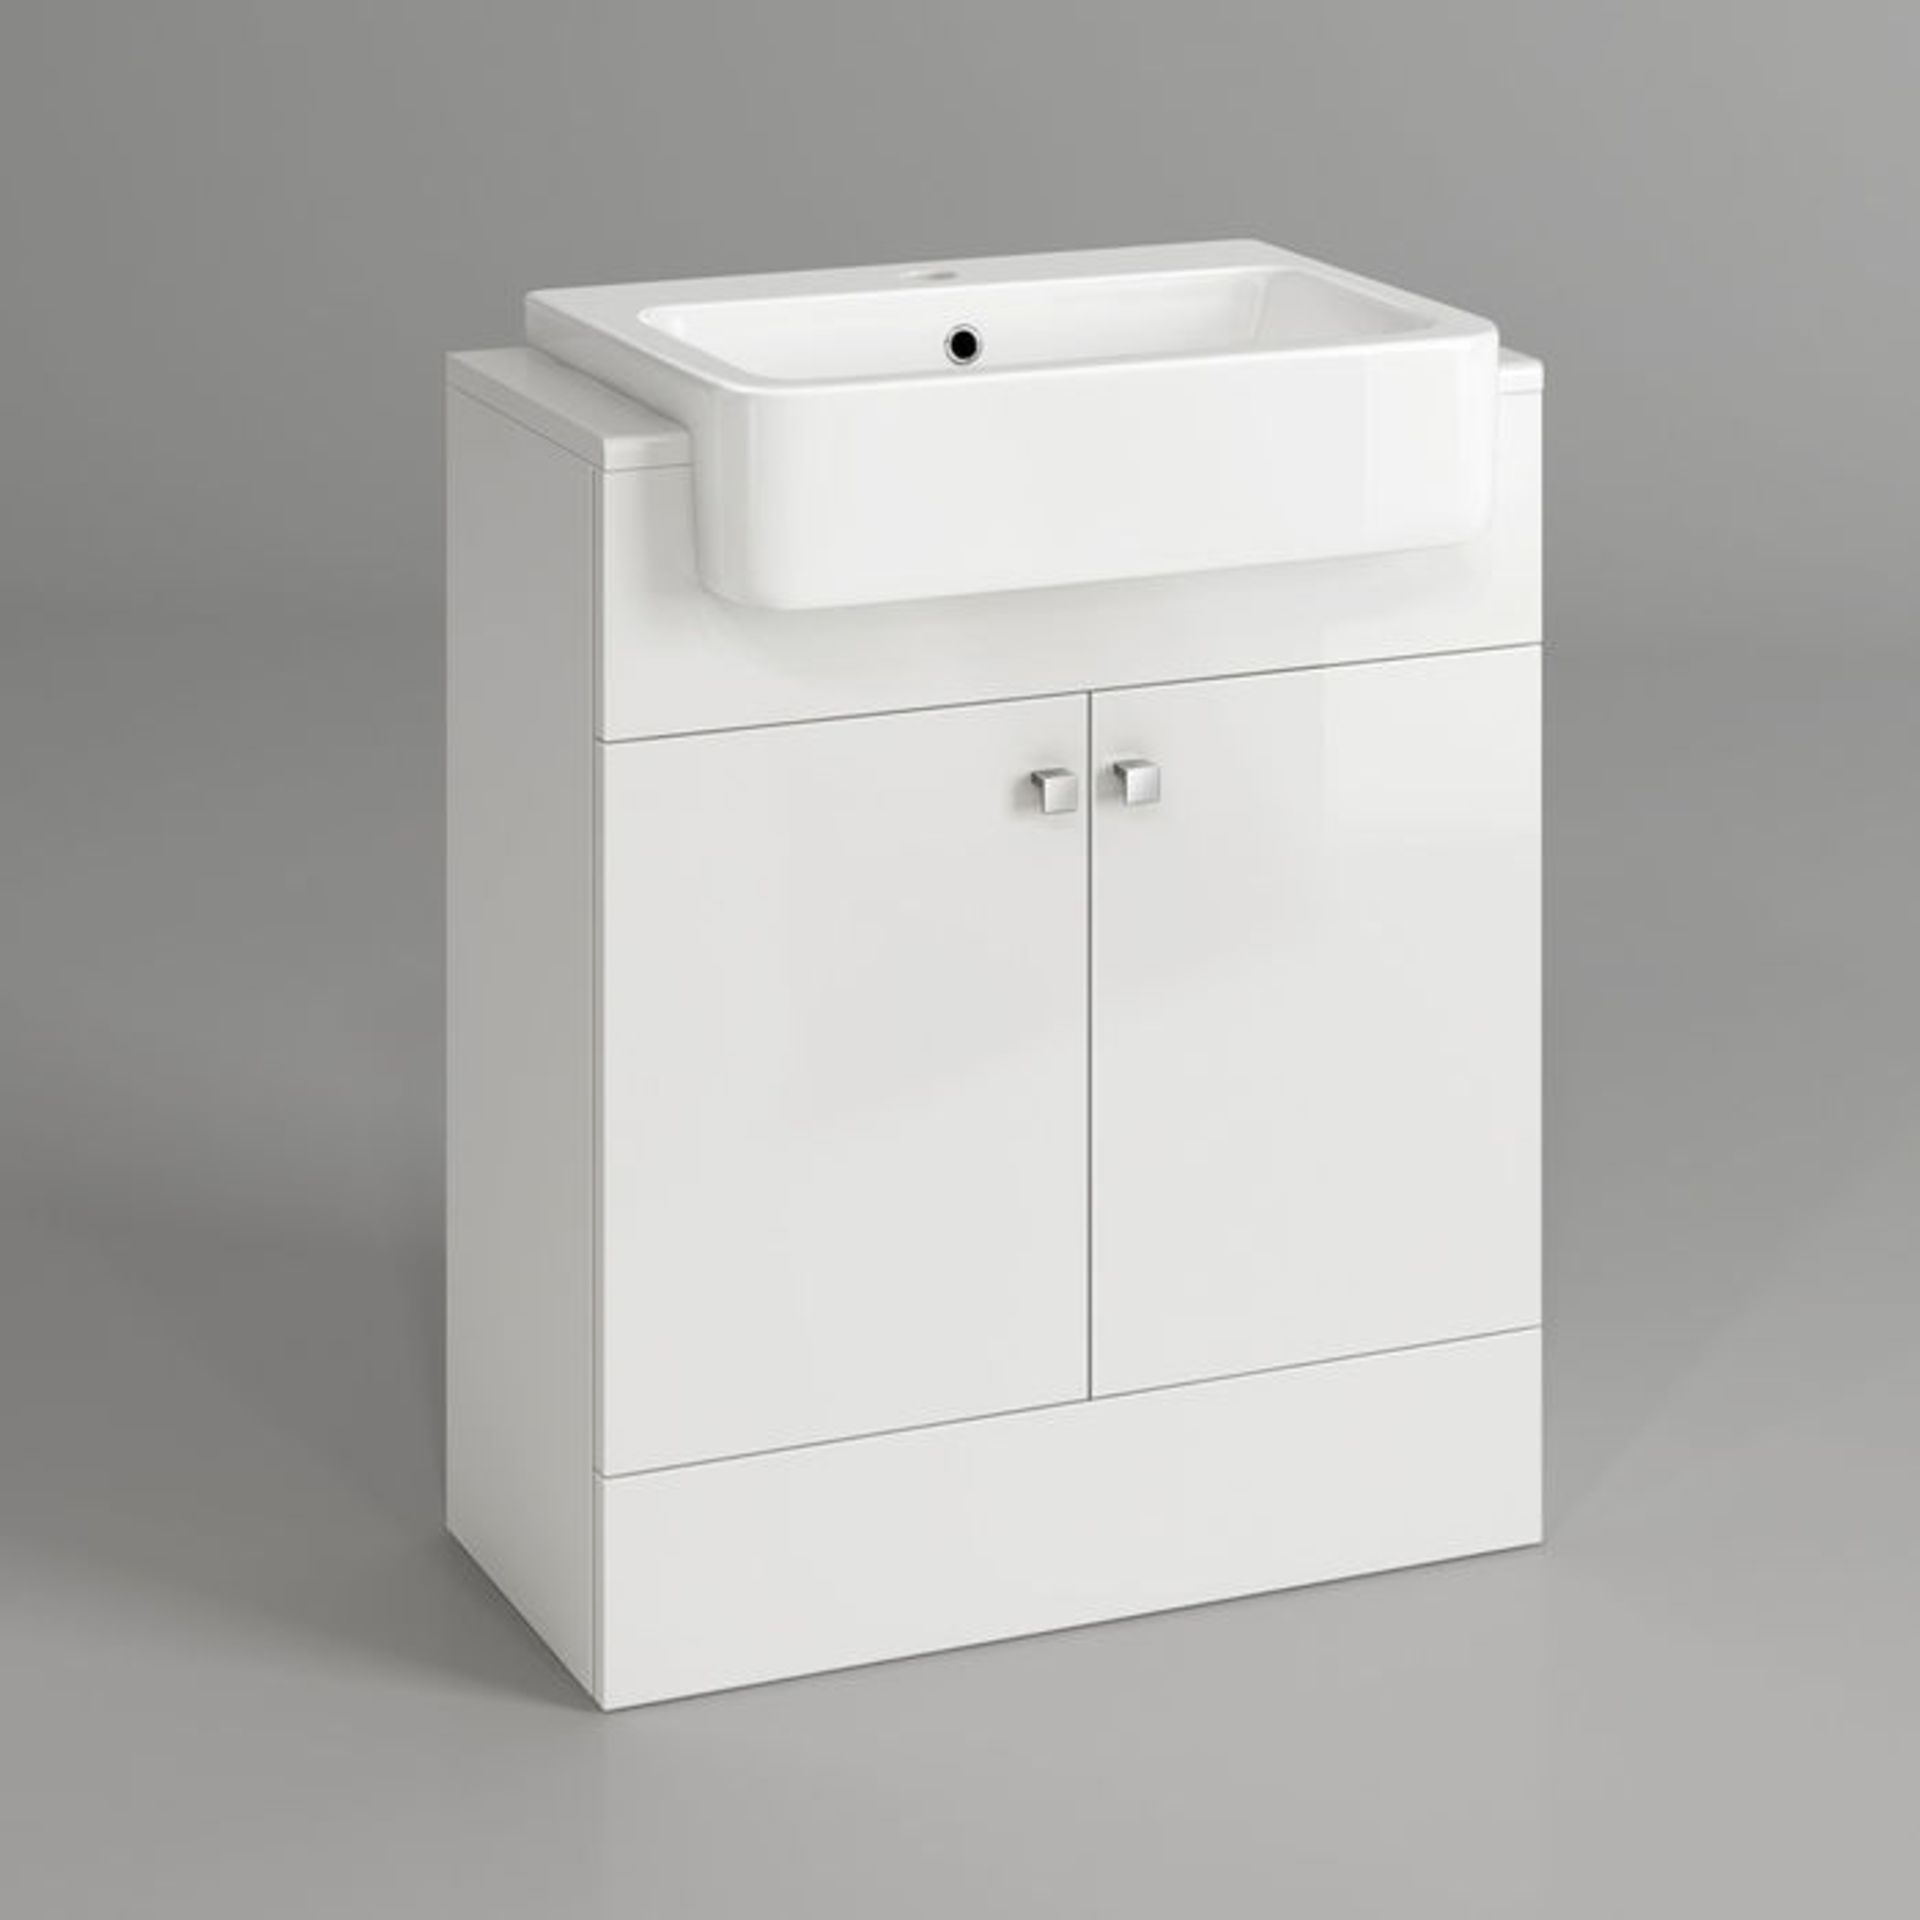 (AH29) 660mm Harper Gloss White Basin Vanity Unit - Floor Standing. RRP £499.99. COMES COMPLETE WITH - Image 3 of 4